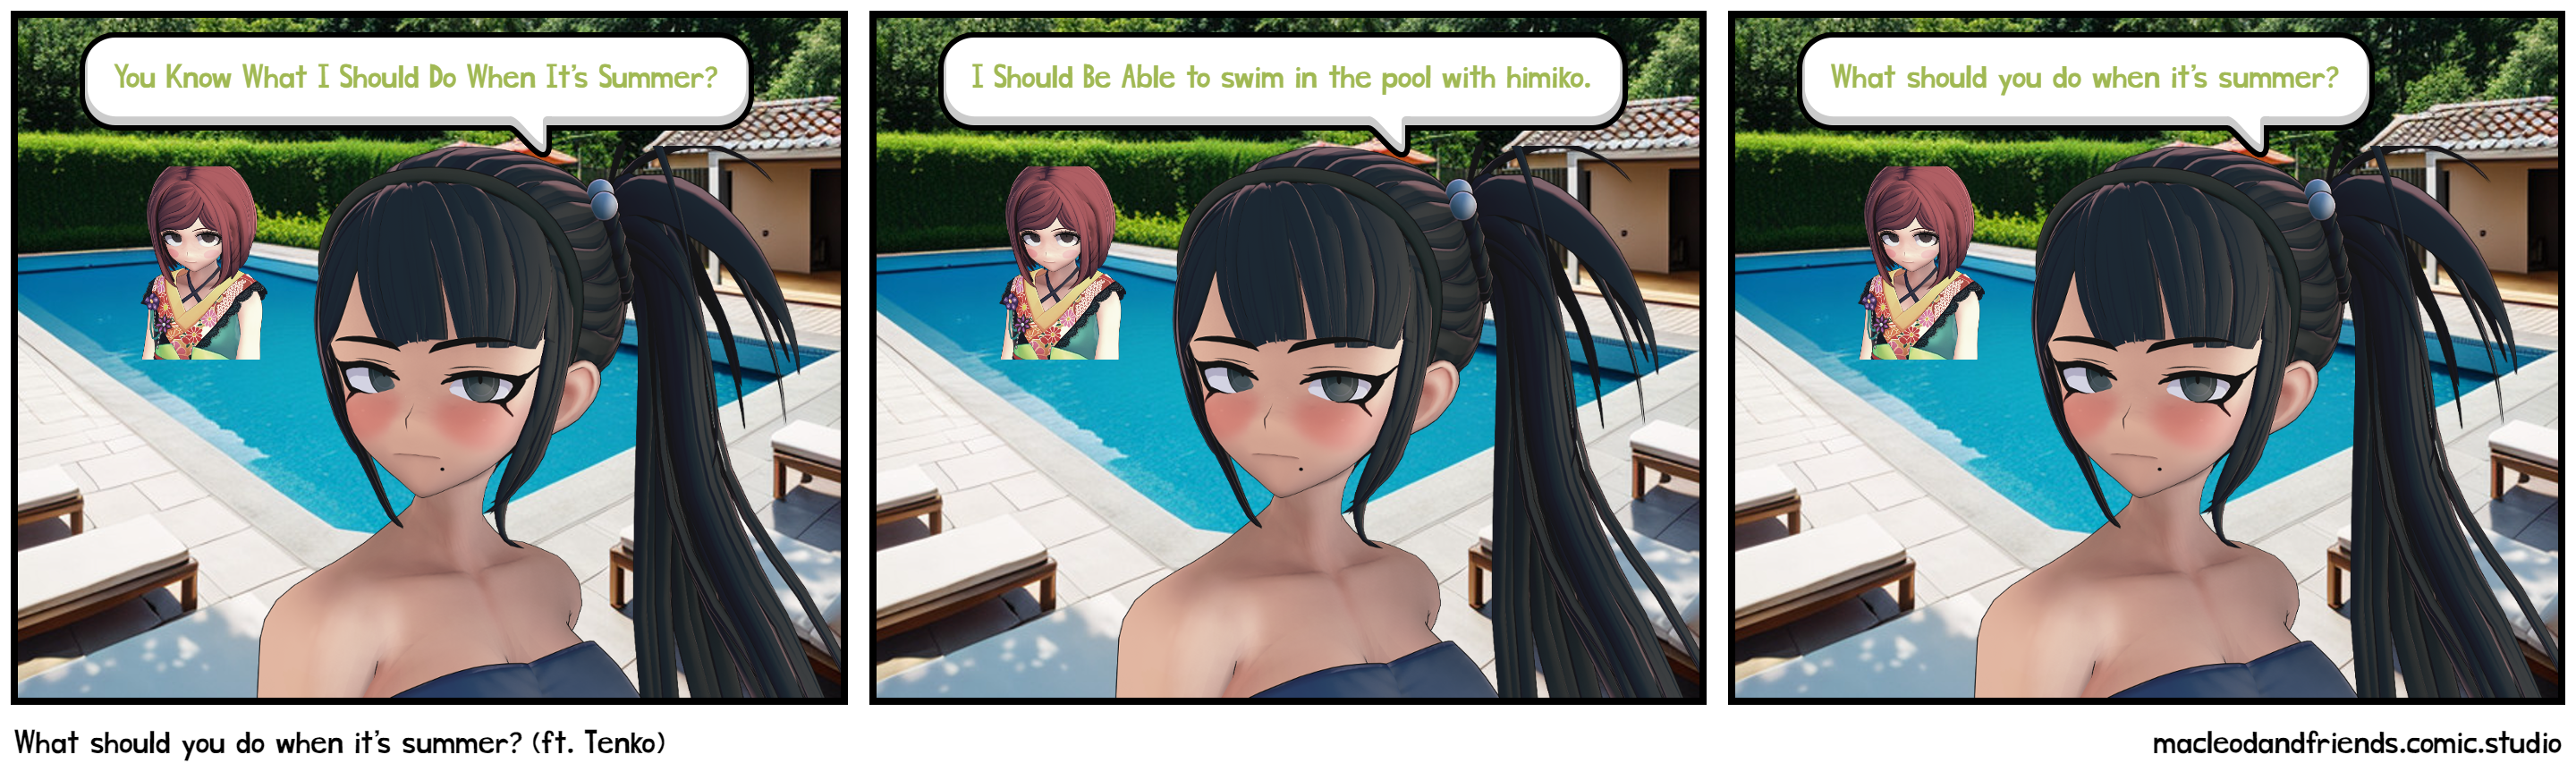 What should you do when it's summer? (ft. Tenko)